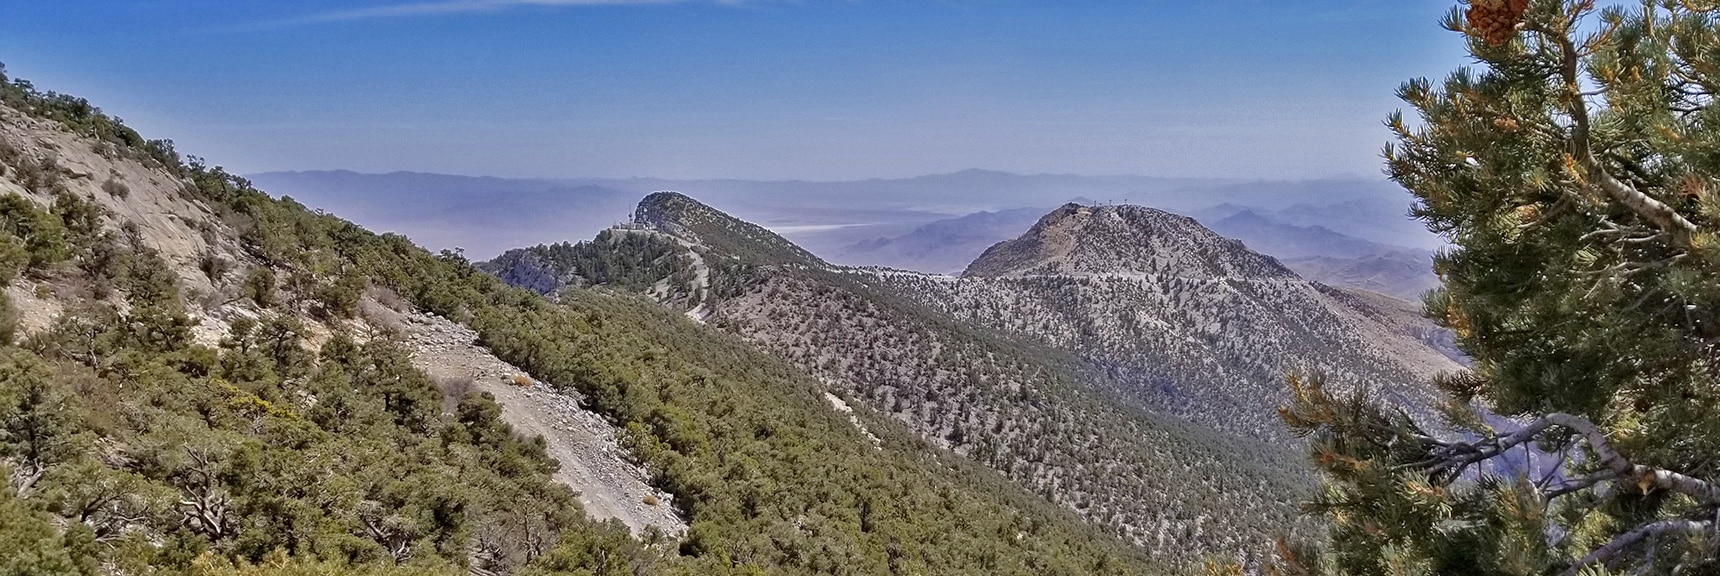 Mid Summit and South Summit Viewed from the North Summit. | Potosi Mountain Spring Mountains Nevada